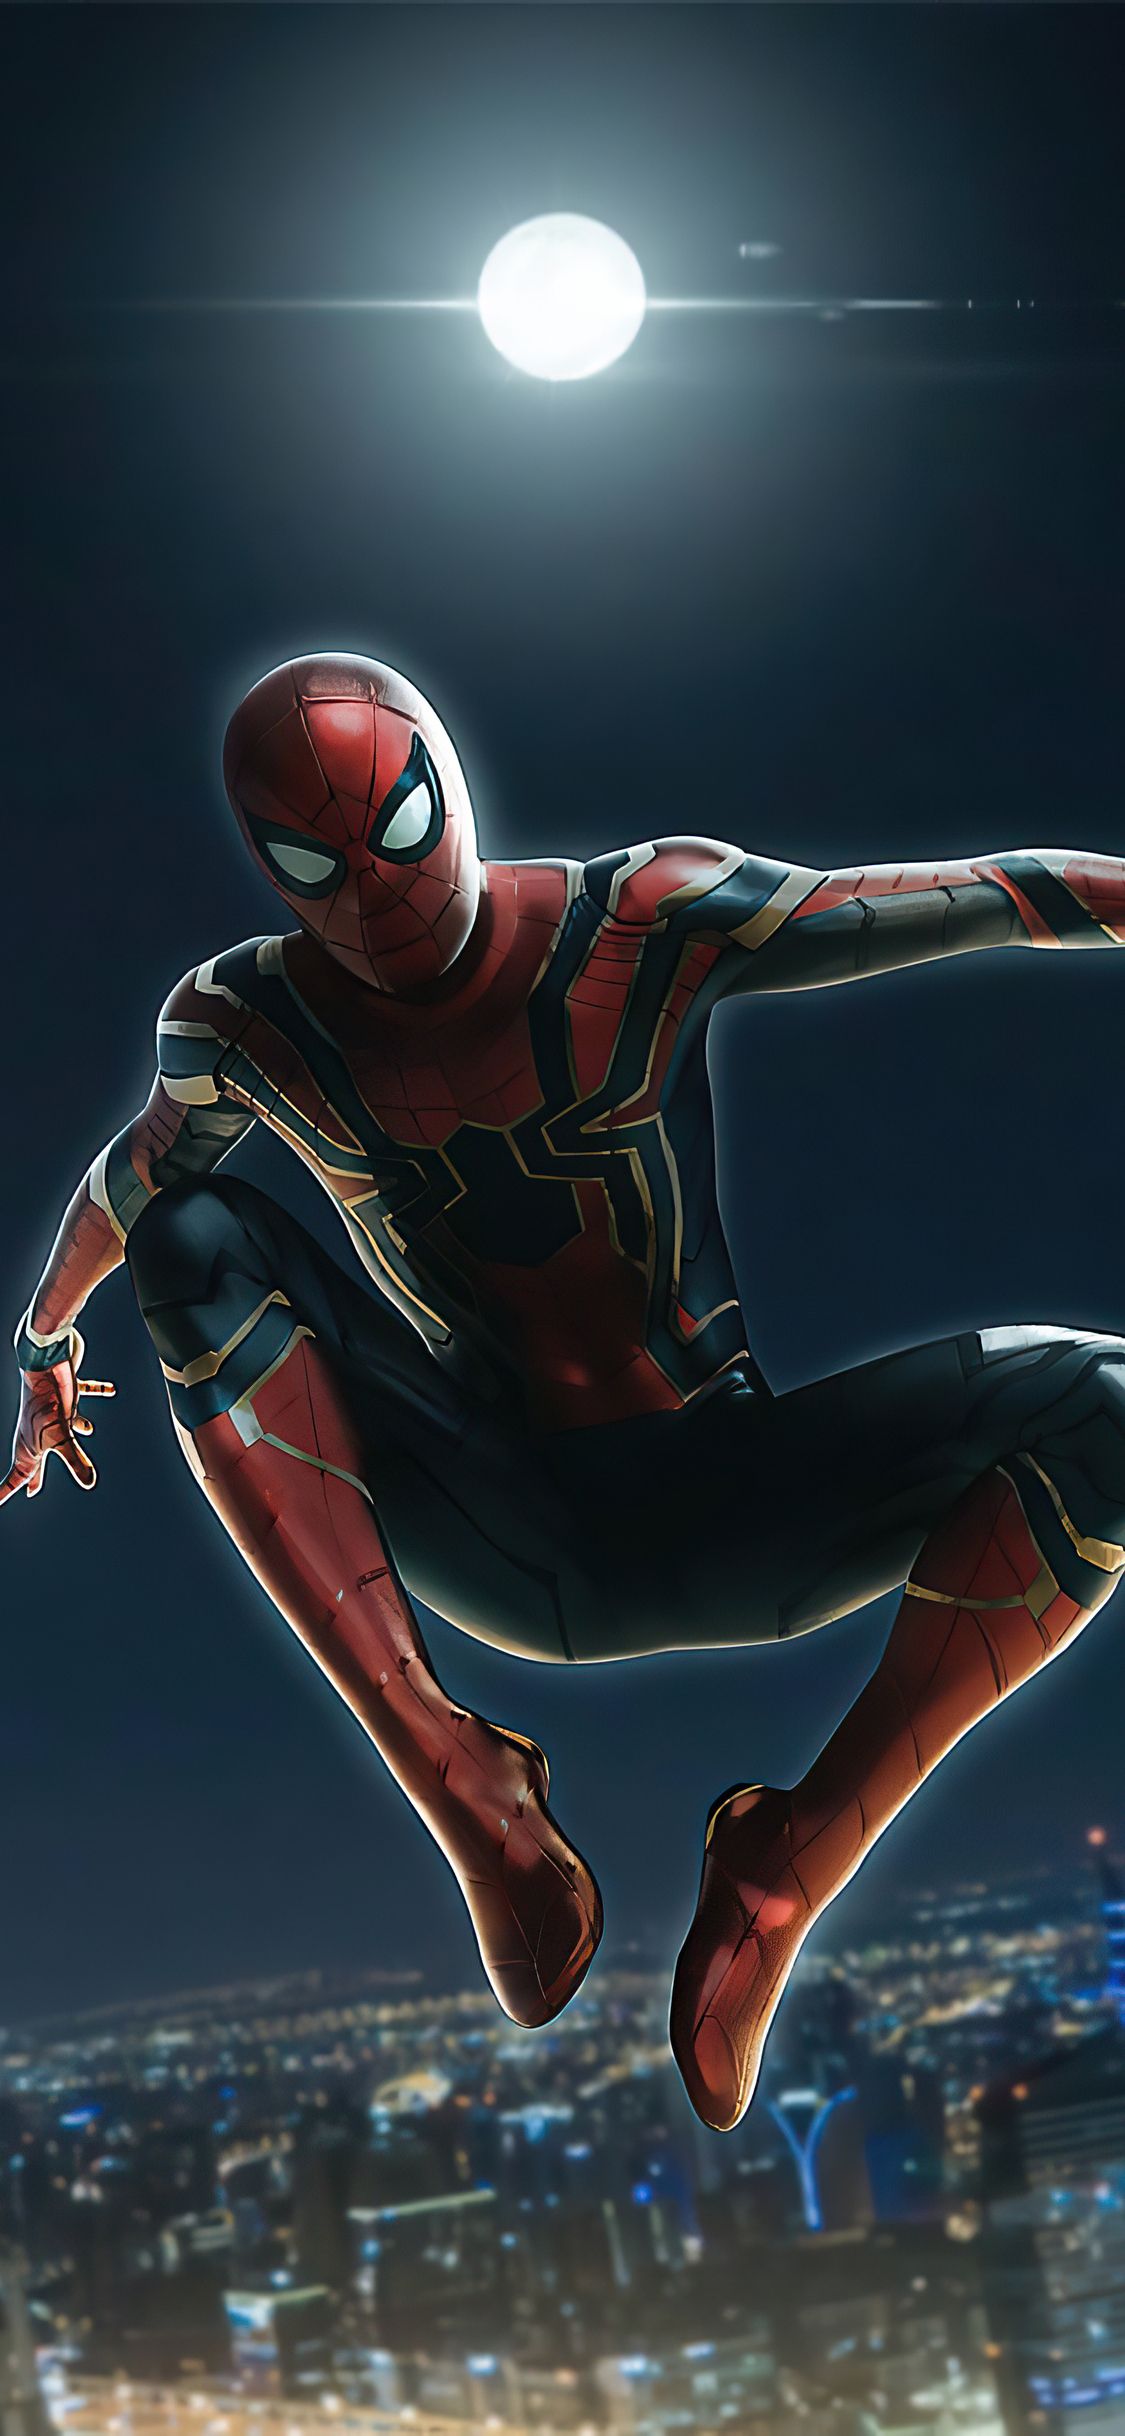 Spider-Man Iron Suit Wallpapers - Top Free Spider-Man Iron Suit ...